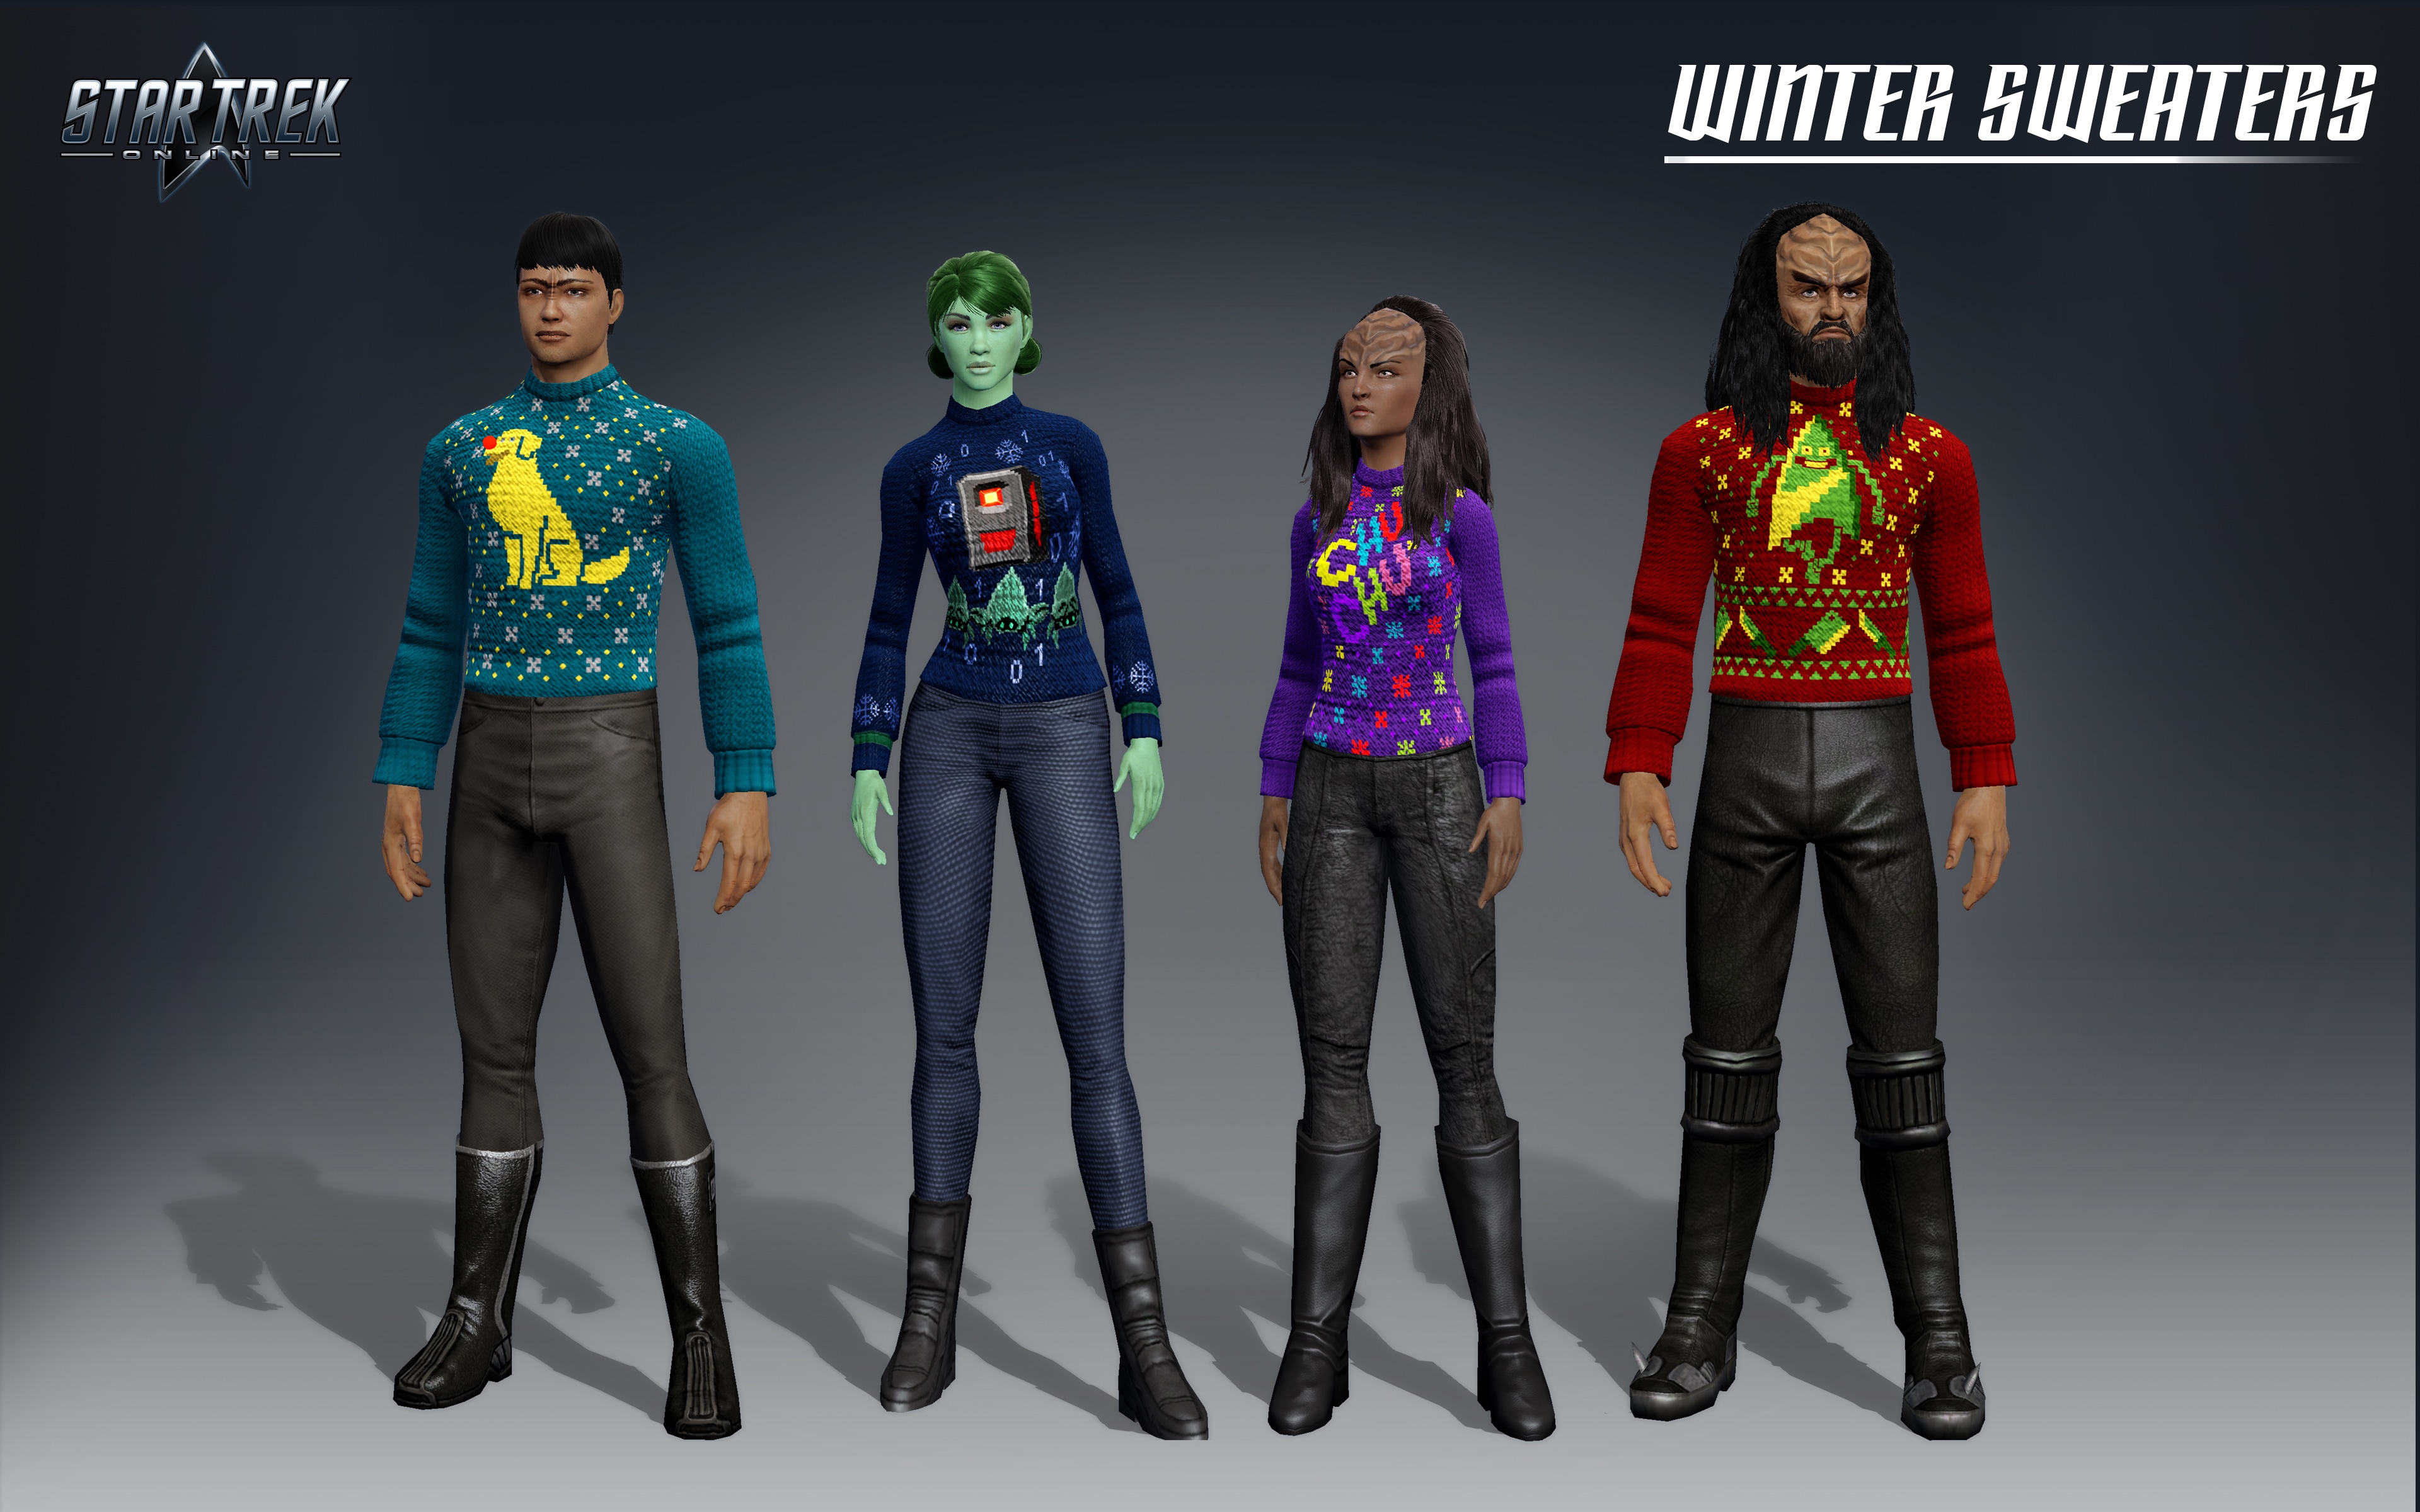 Player characters modeling the new winter sweaters available with Star Trek Online's in-game winter holiday event